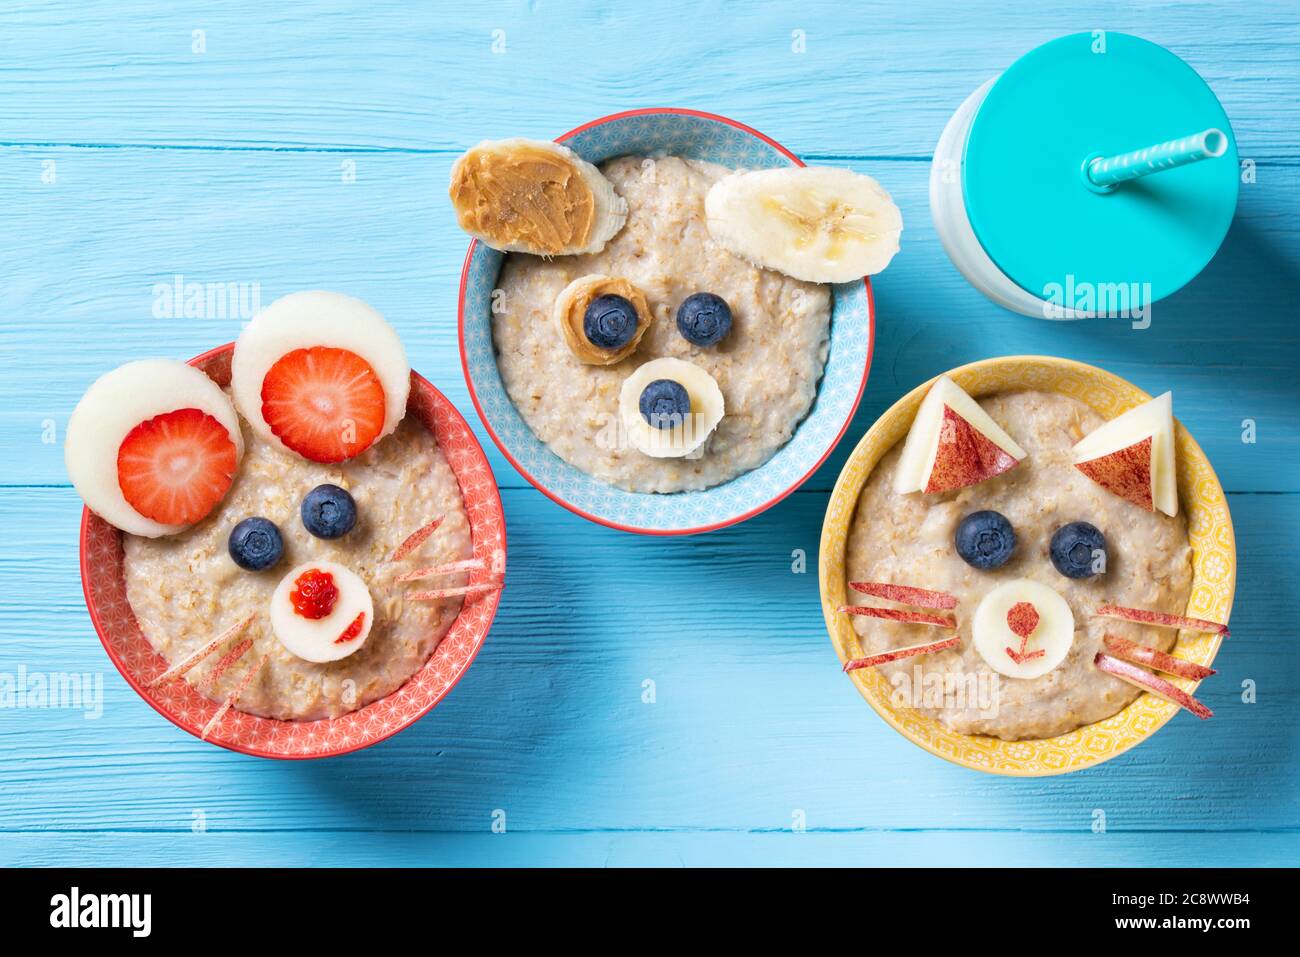 Funny bowls with oat porridge with cat, dog and mouse faces made of fruits and berries, food for kids idea, top view Stock Photo